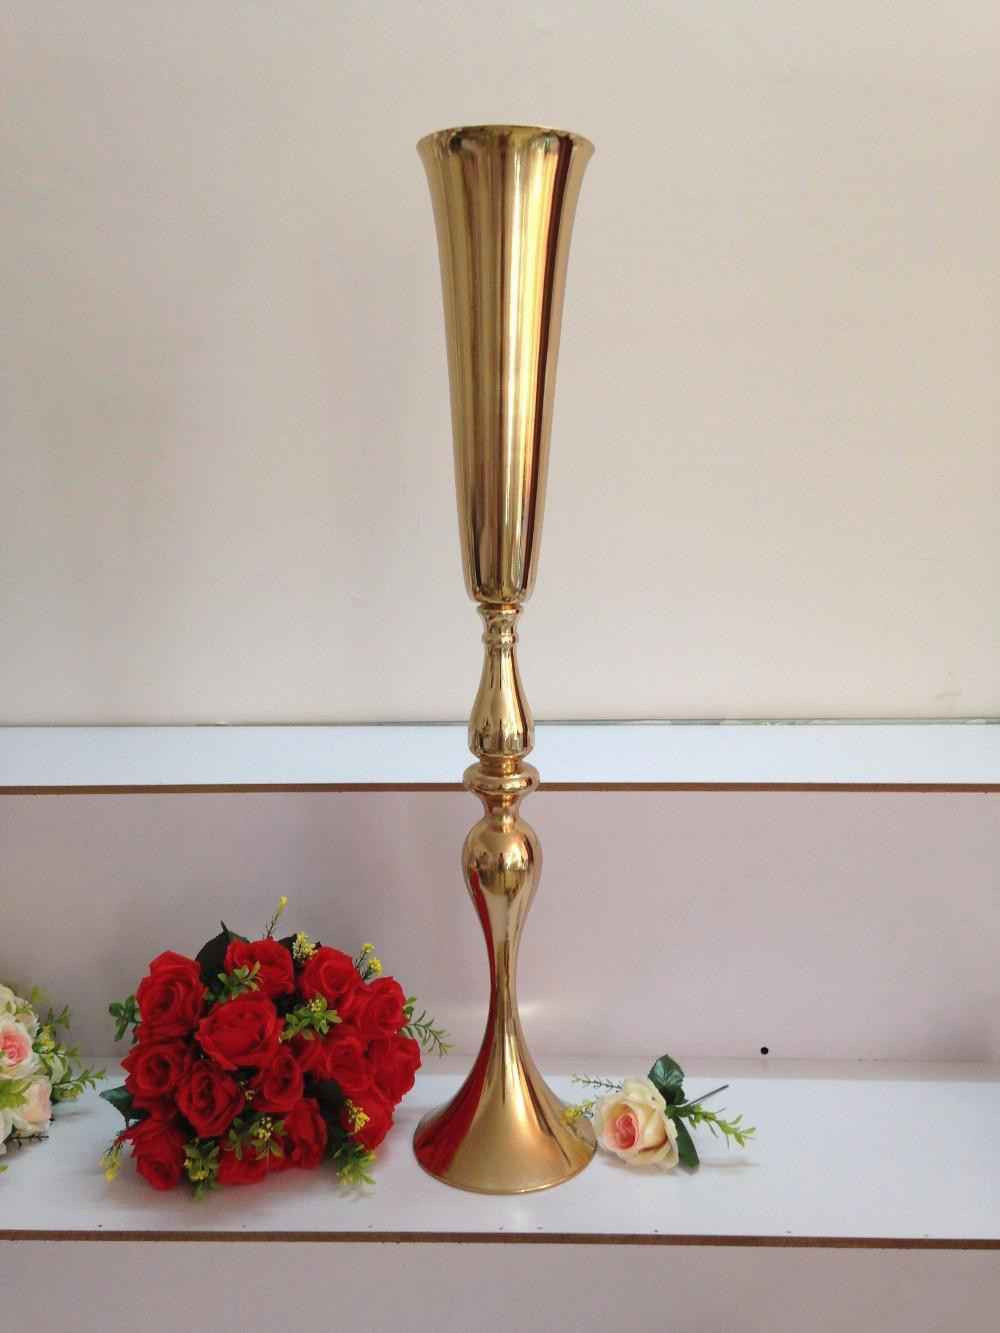 20 Popular Rose Medallion Vase 2024 free download rose medallion vase of vases collection page 19 vases artificial plants collection with regard to tall gold vases image faux crystal candle holders alive vases gold tall jpgi 0d cheap in of 